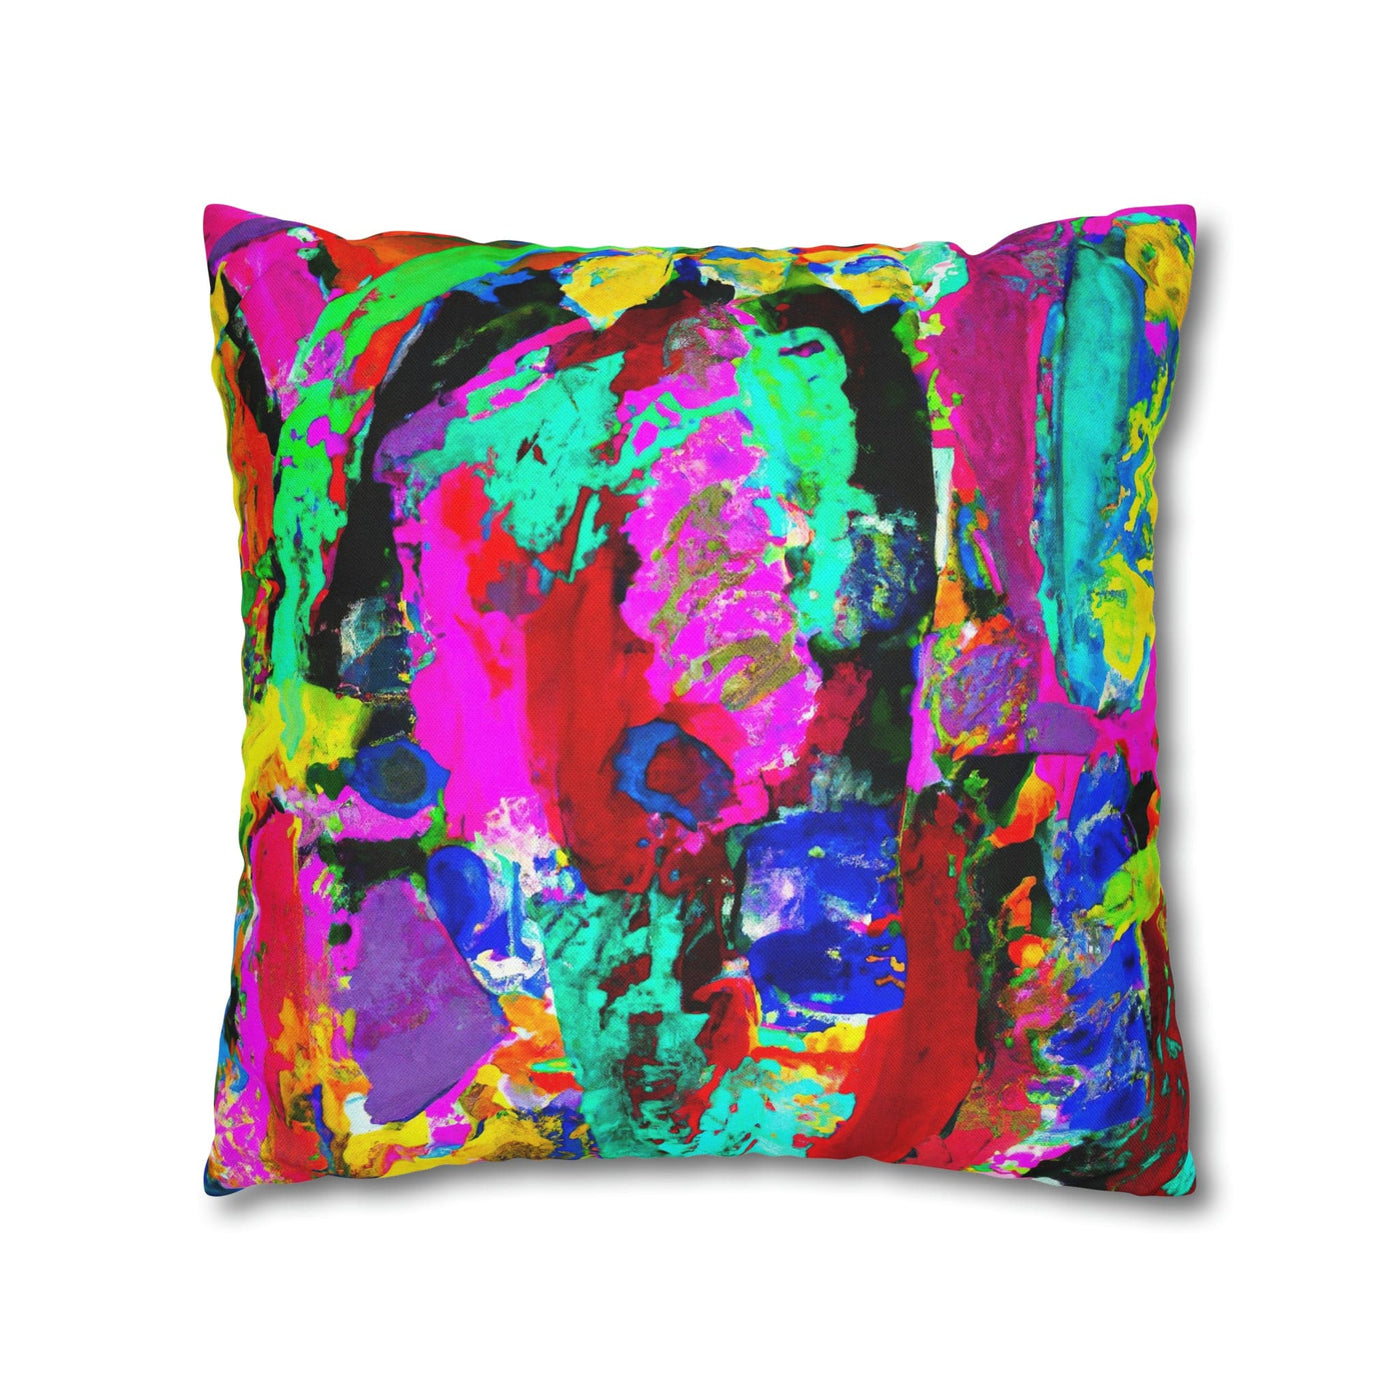 Decorative Throw Pillow Covers With Zipper - Set Of 2 Multicolor Abstract